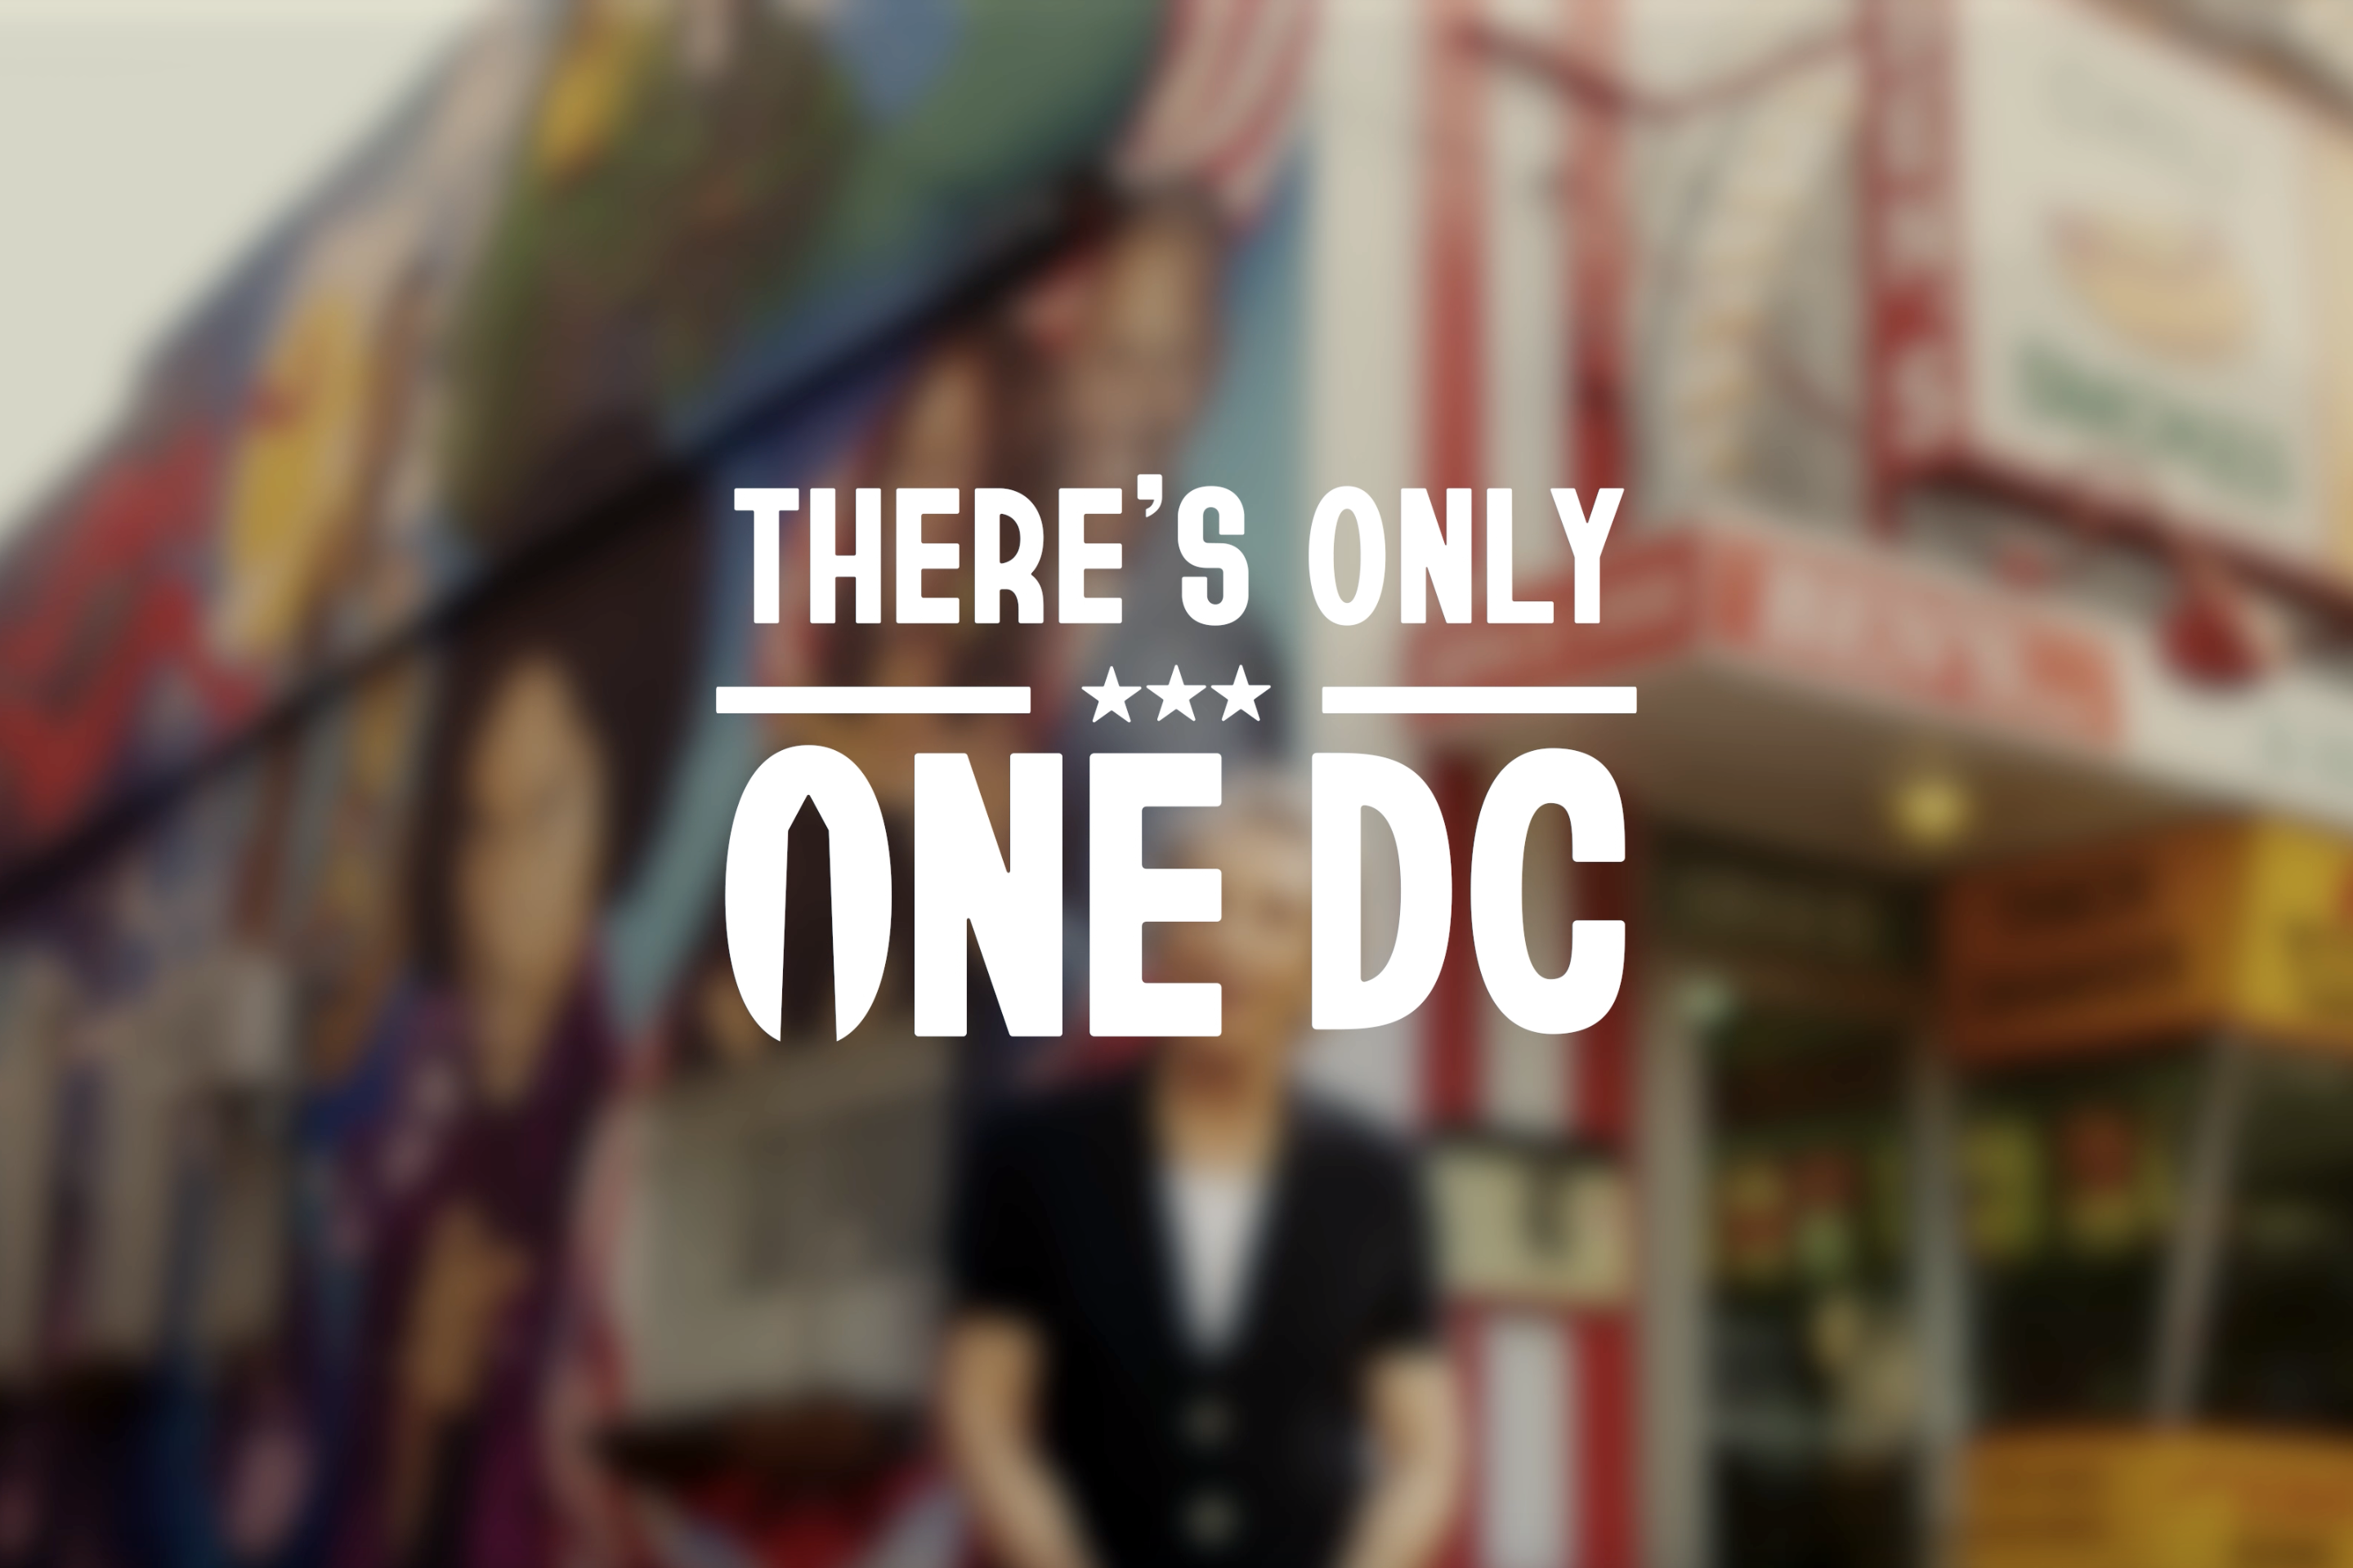 New slogan and campaign tries to lure tourists to DC